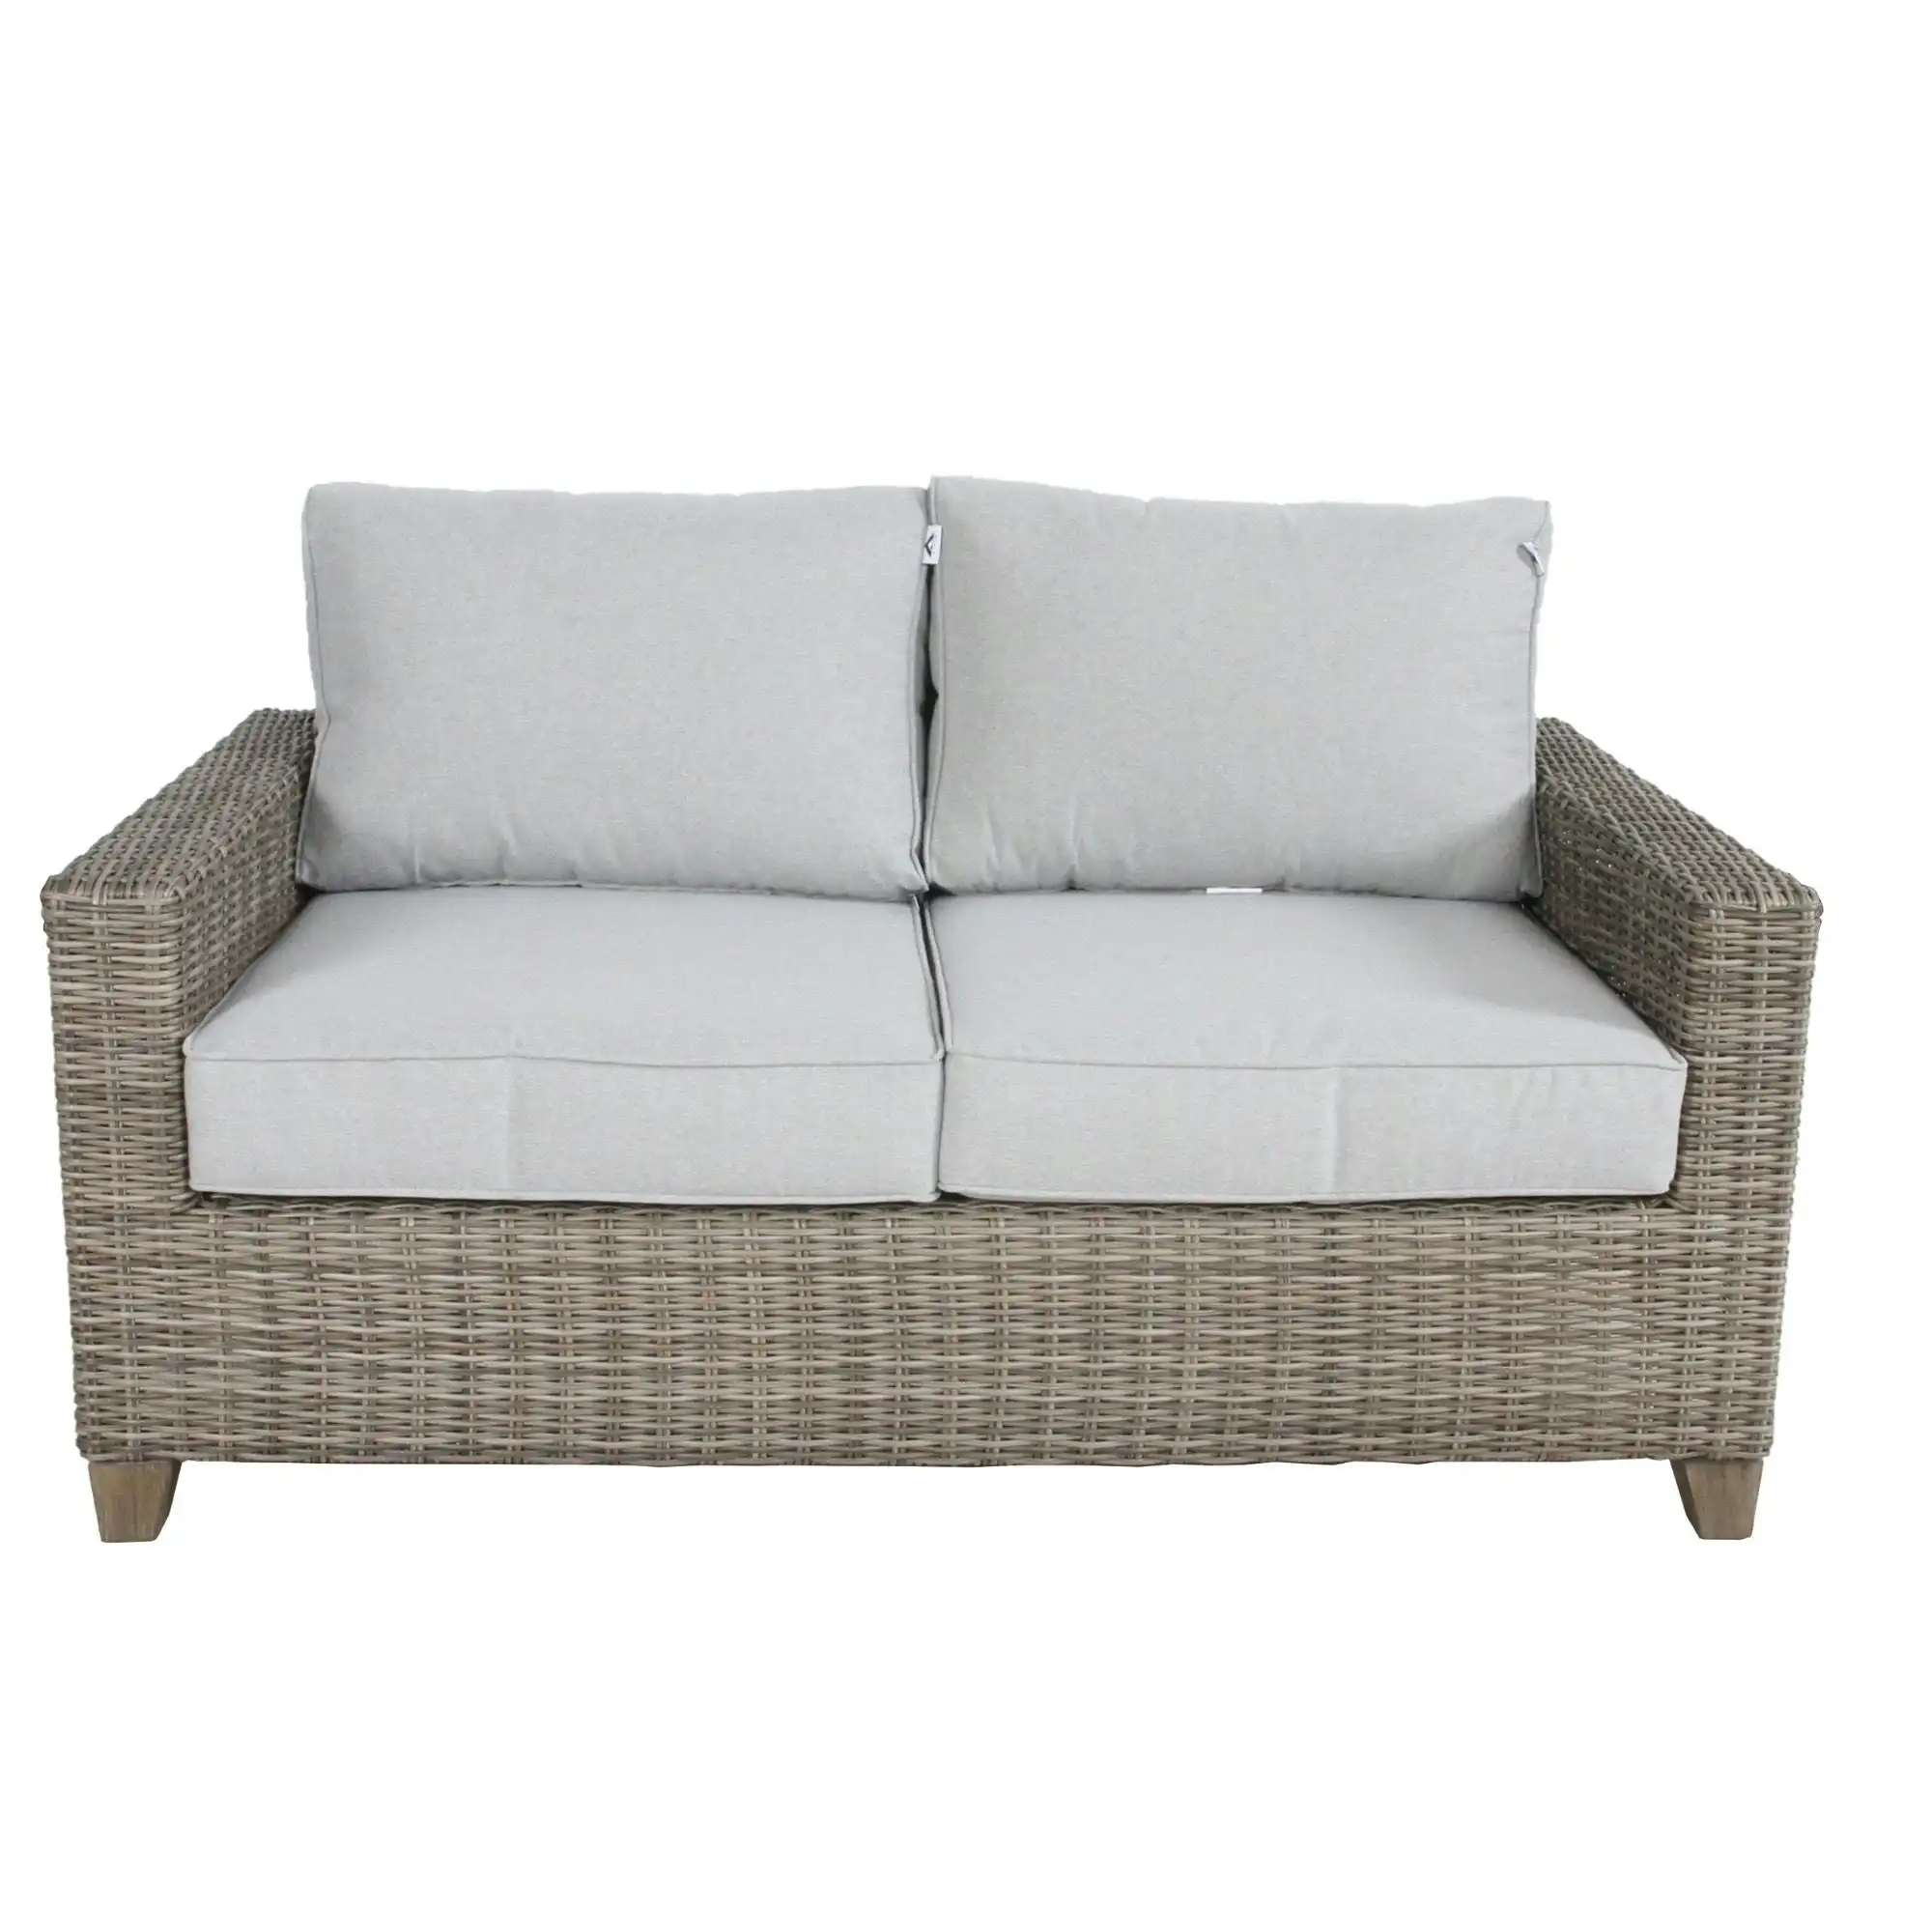 Sophy 2 Seater Outdoor Sofa Lounge